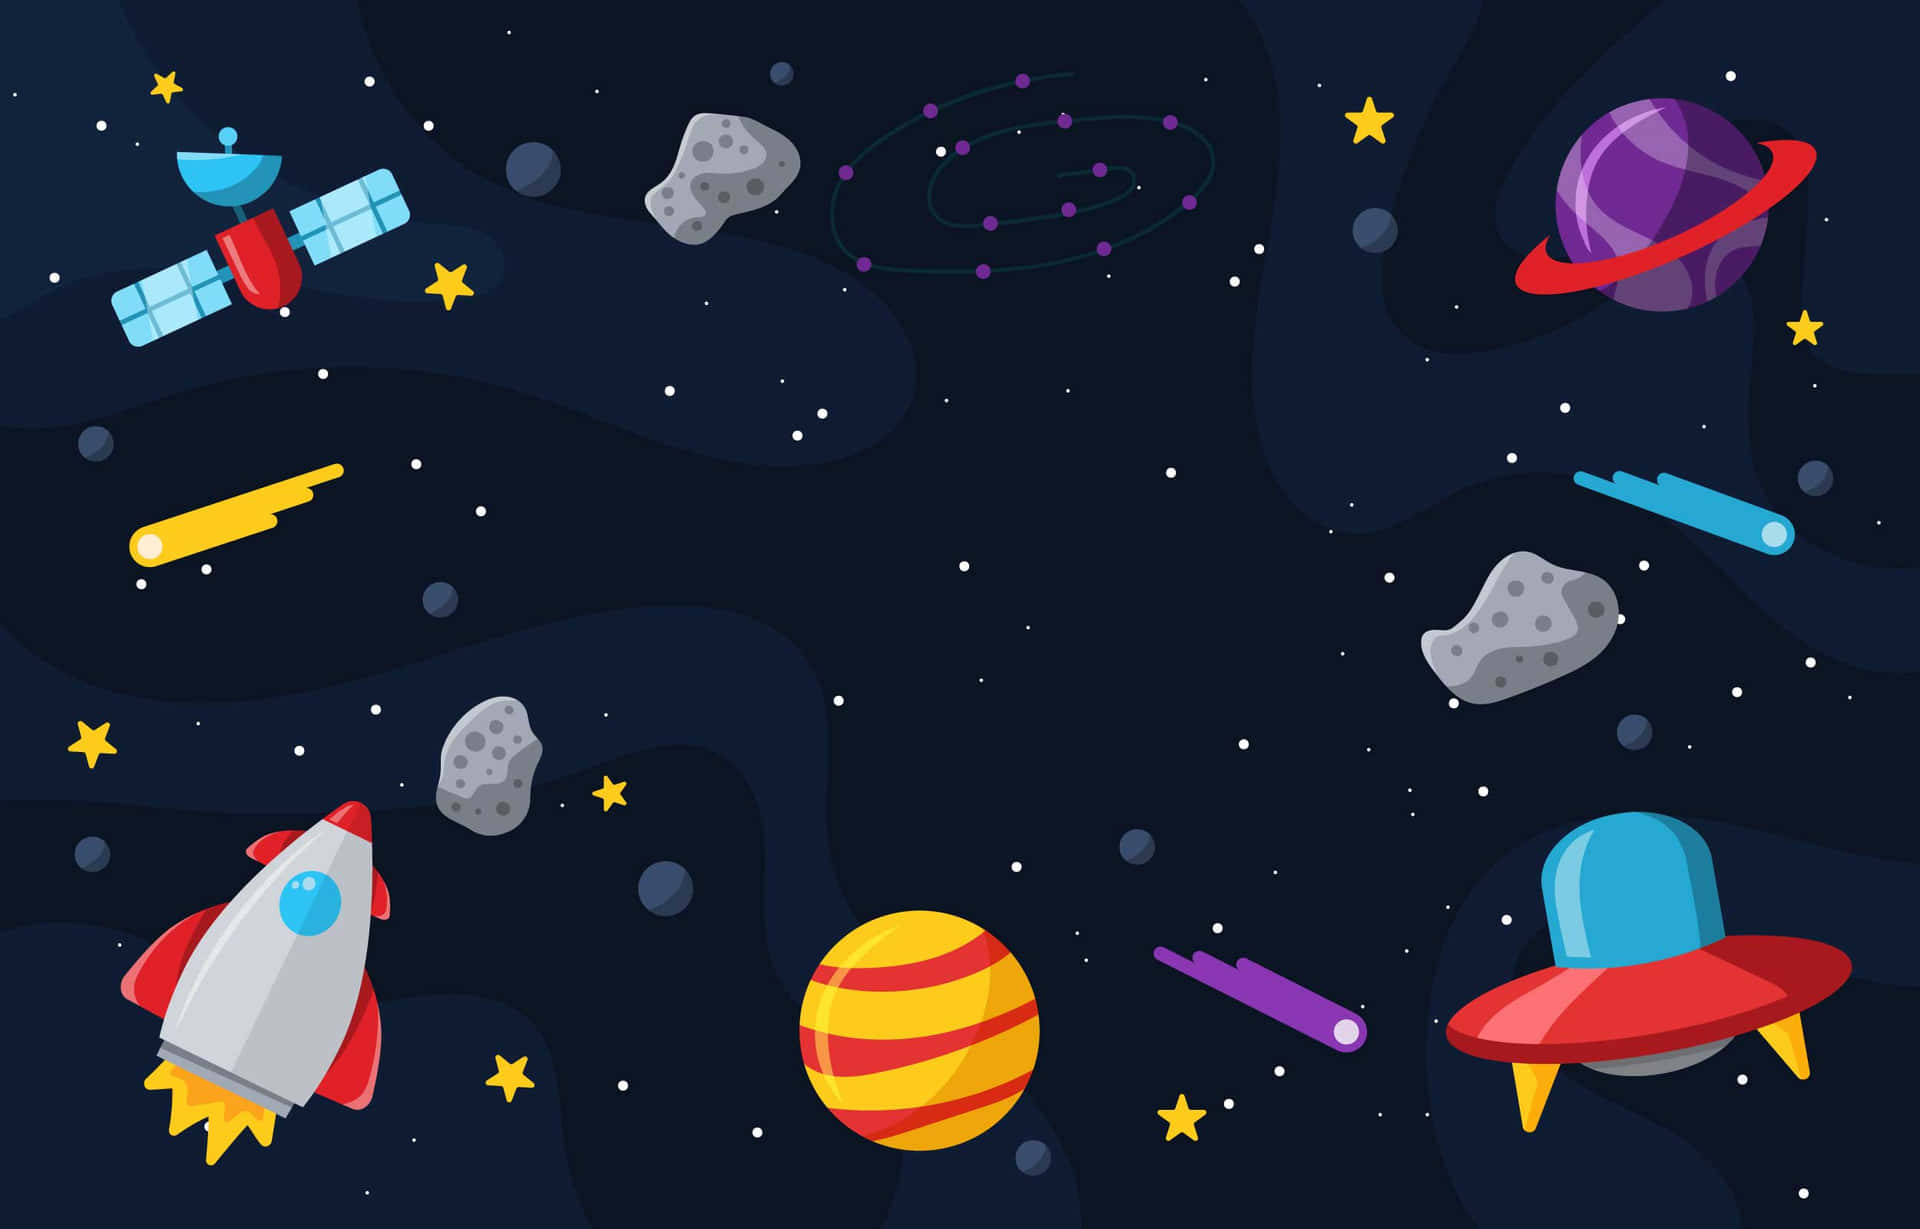 Free Animated Space Wallpaper Downloads, [100+] Animated Space Wallpapers  for FREE 